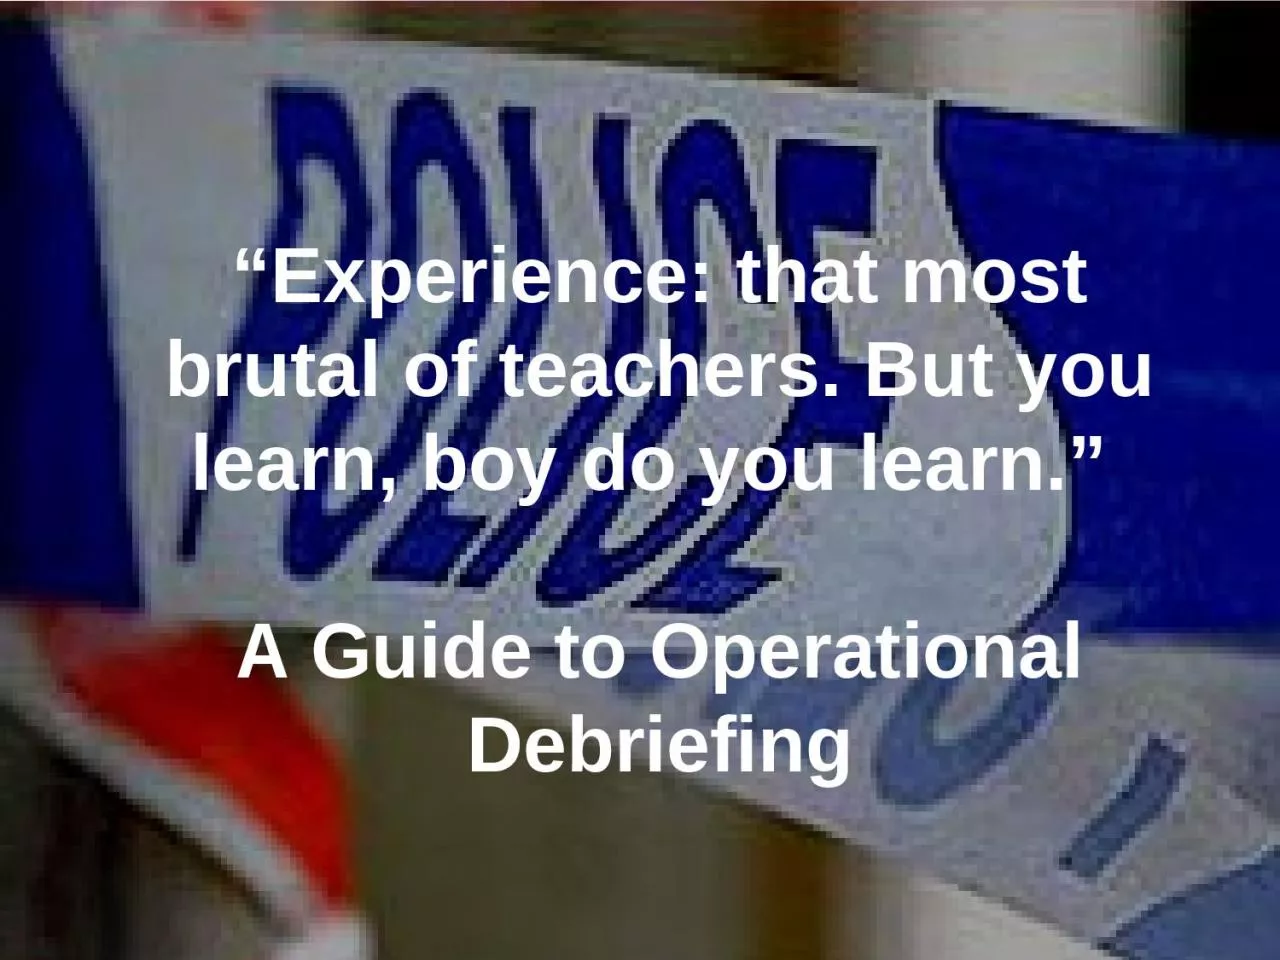 “Experience: that most brutal of teachers. But you learn, boy do you learn.”